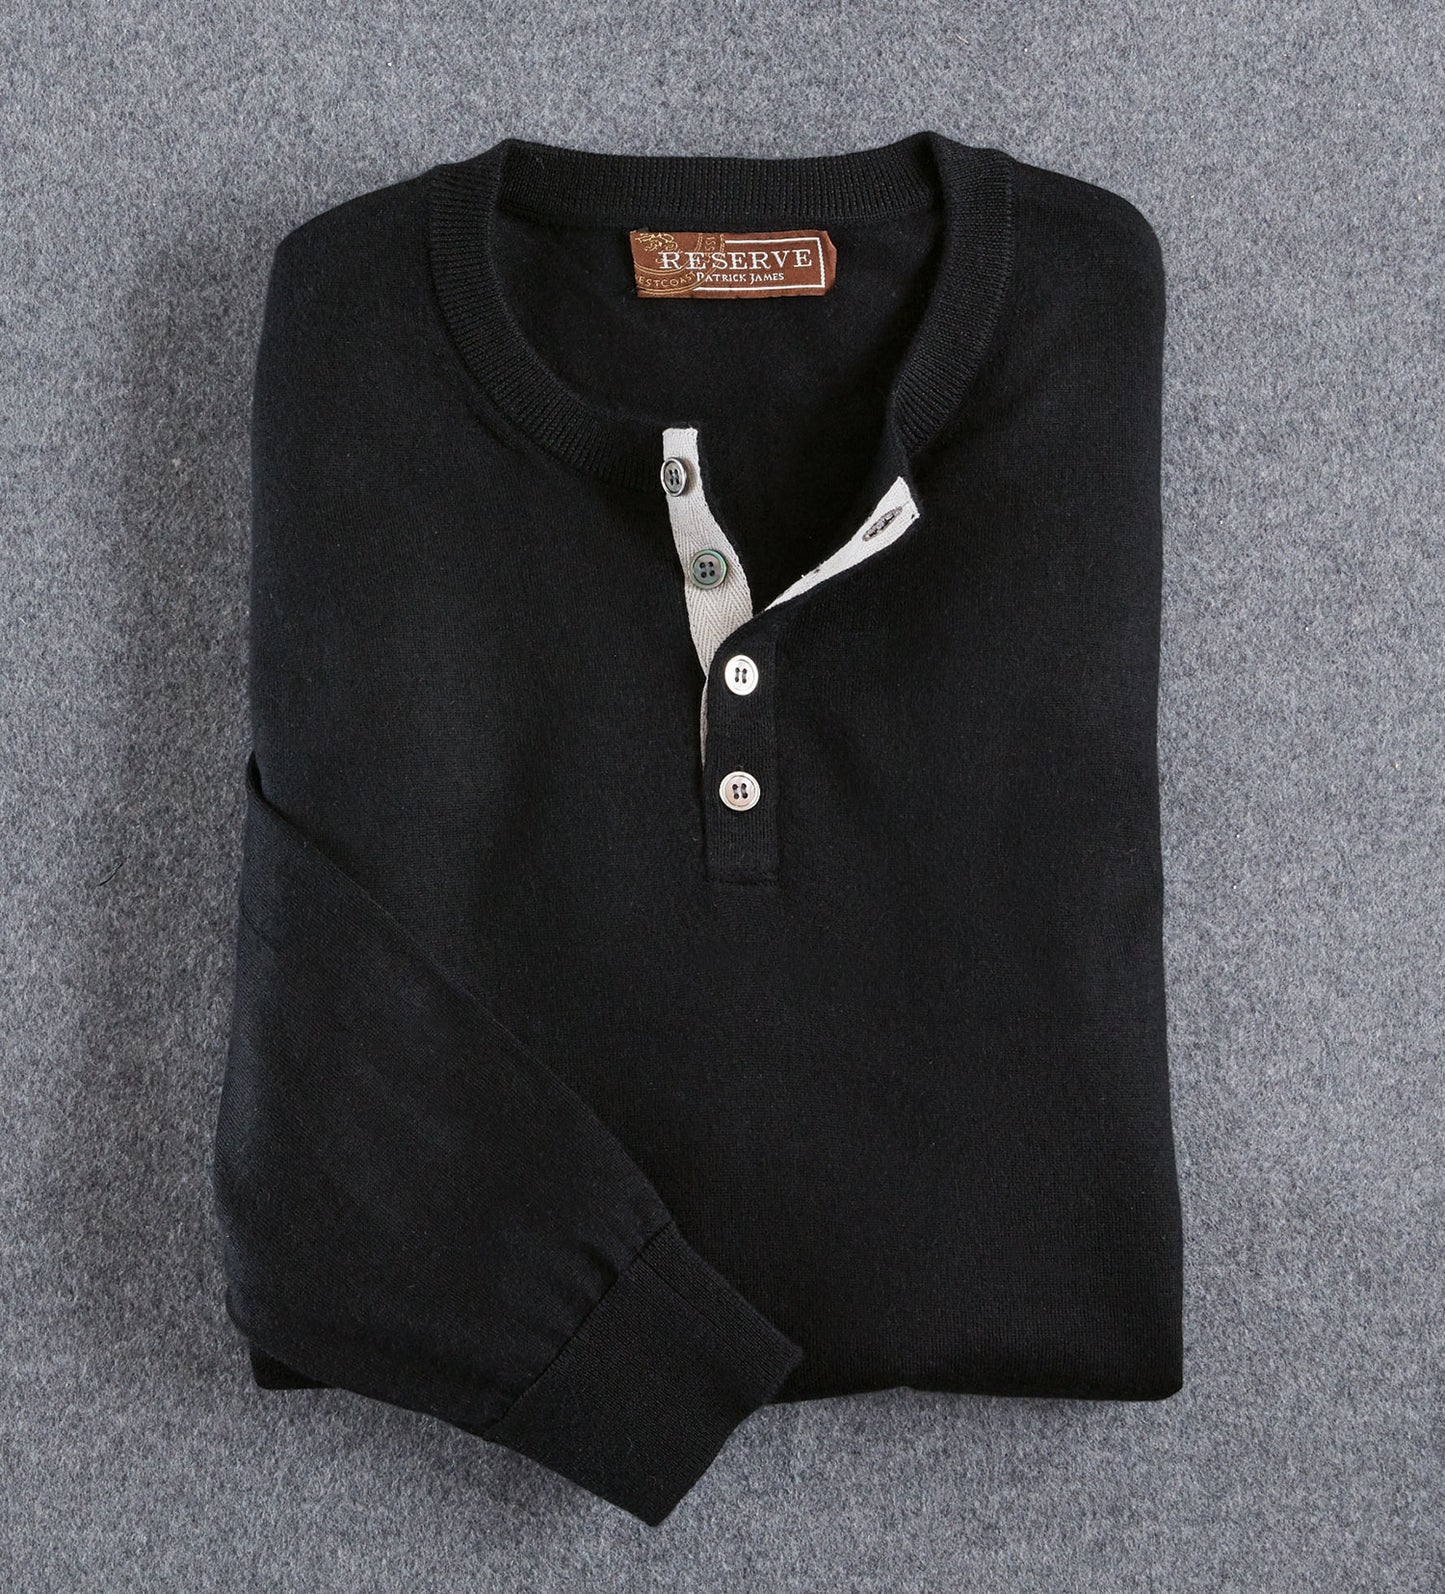 Reserve Cashmere Henley Sweater